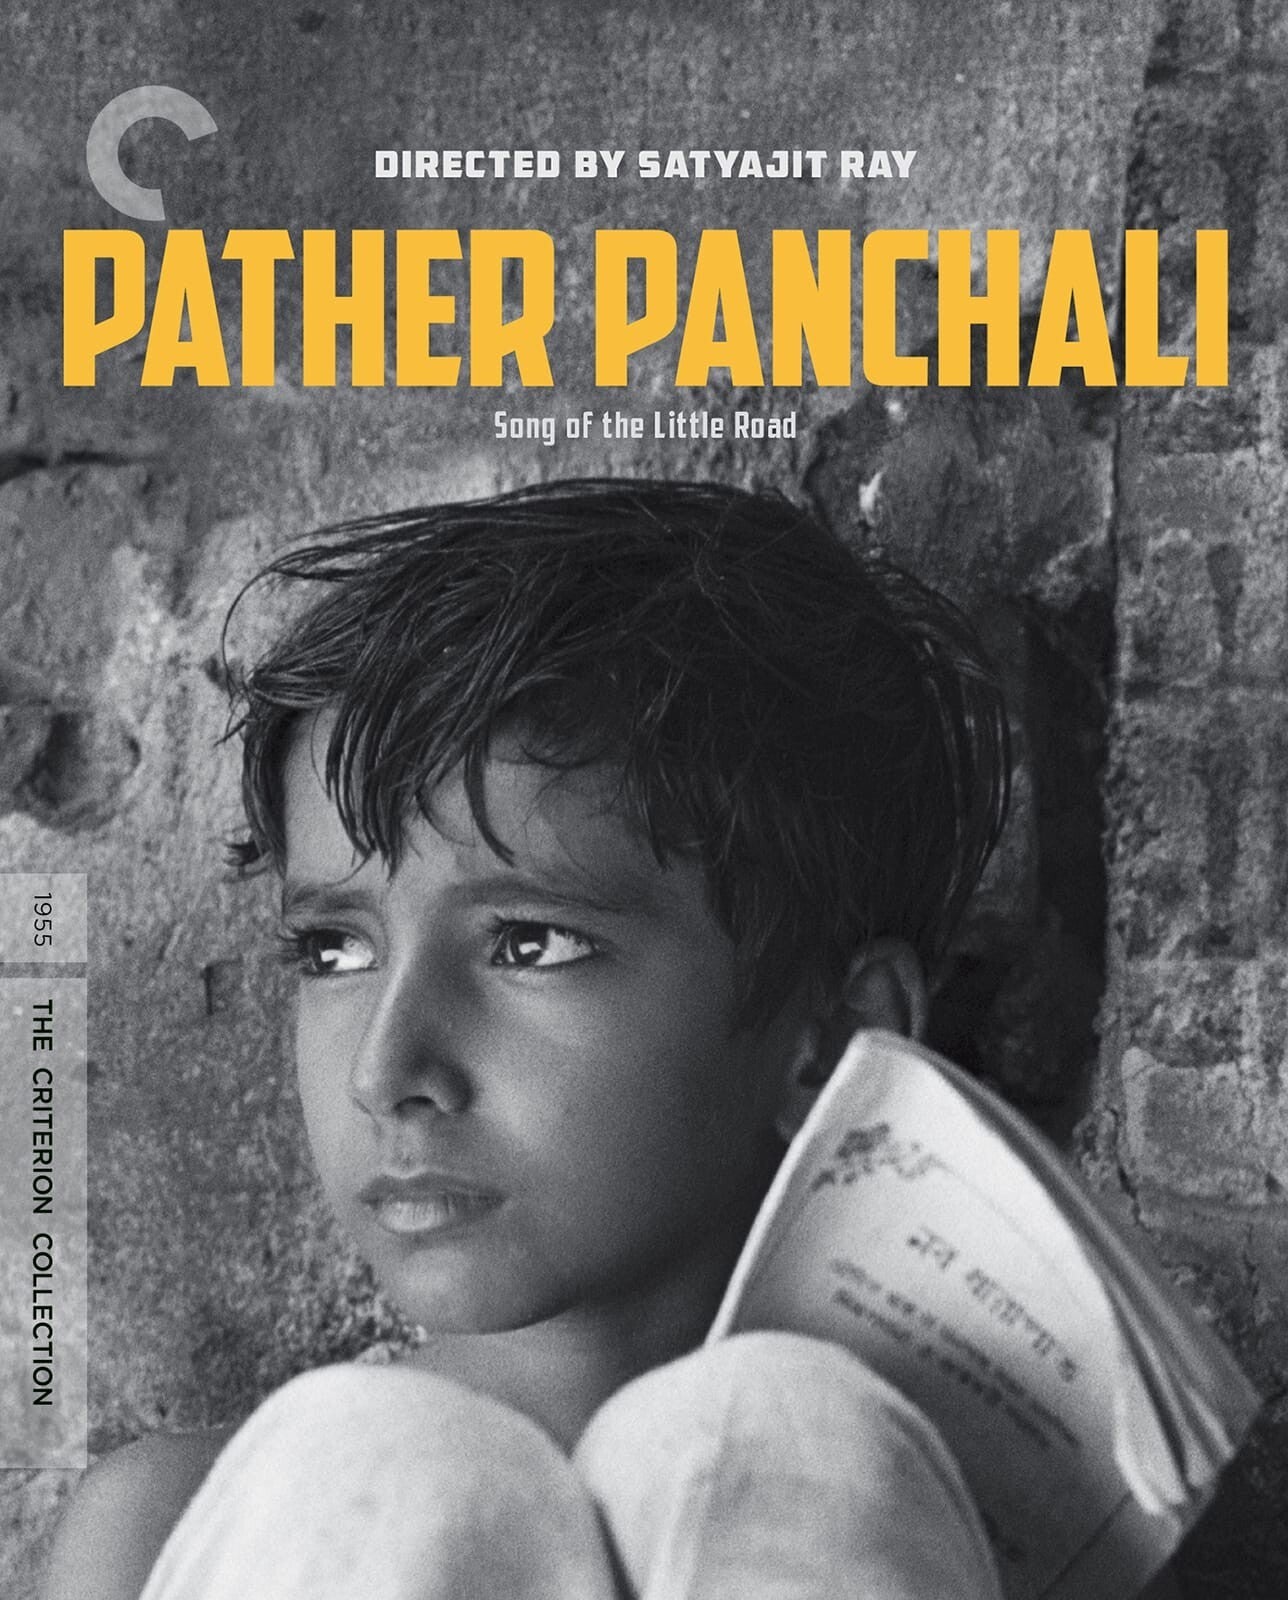 The Apu Trilogy 4K: Criterion Collection DigiPack